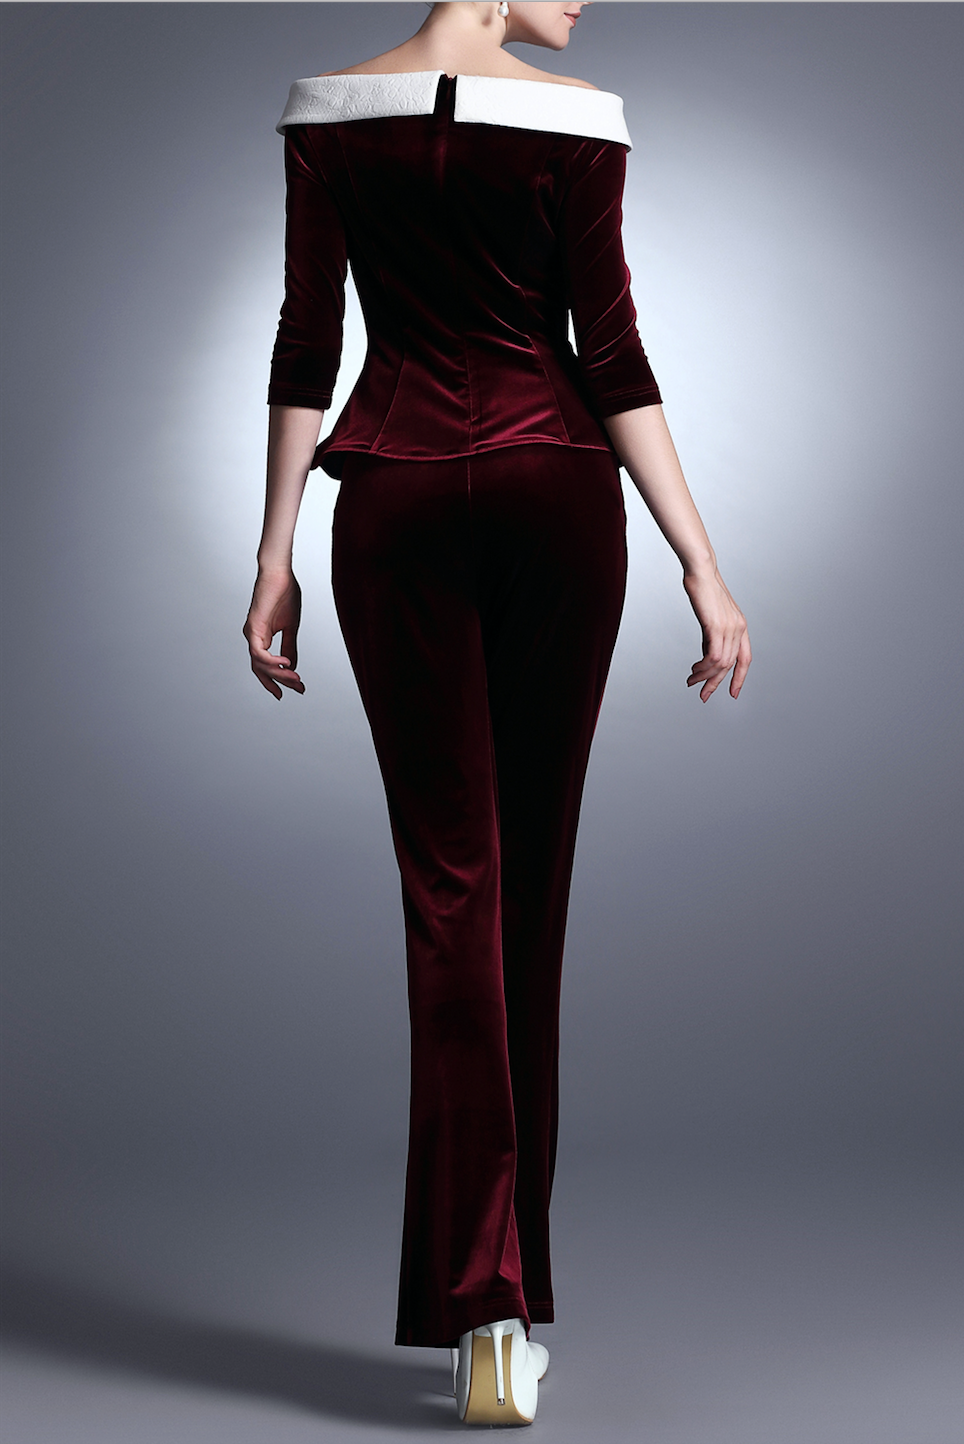 May Stretchy Velvet Pants - Luxurious, Fun & Multifunctional